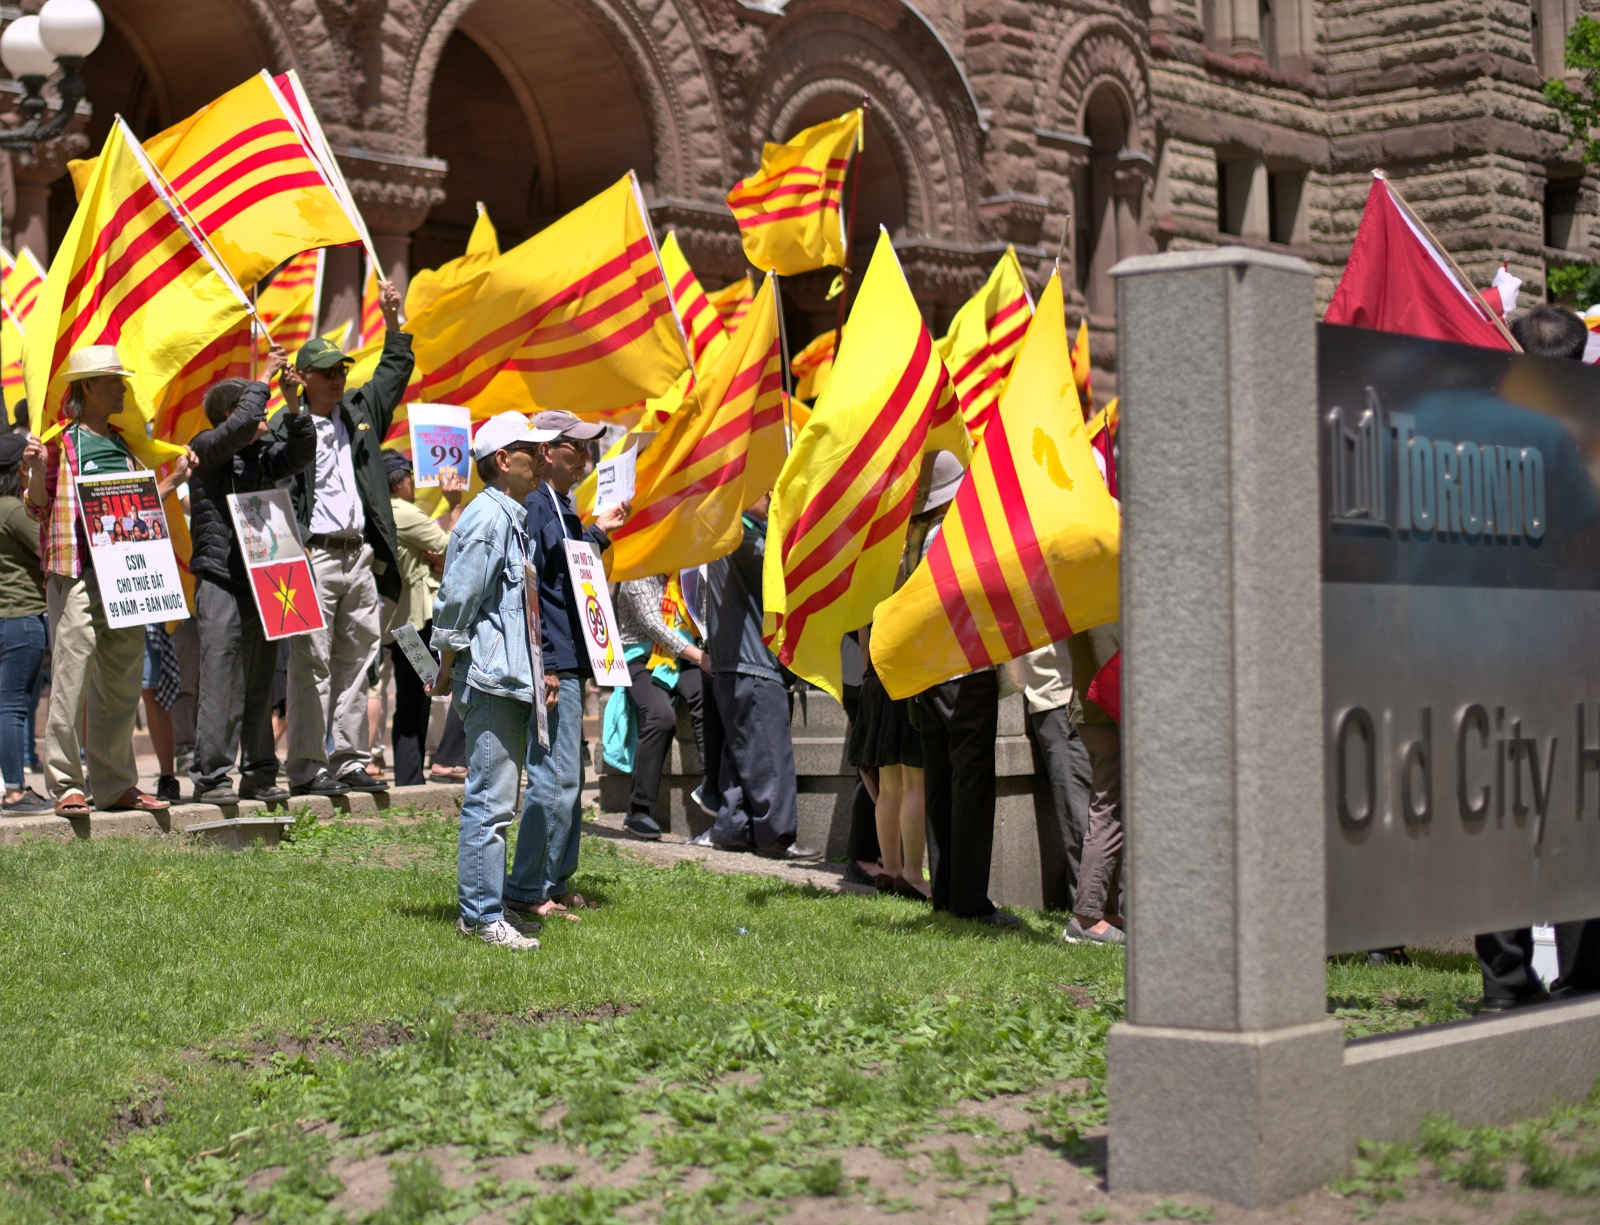  Vietnam protesters at Old City Hall, Toronot over economic zones law 10JUNE2018